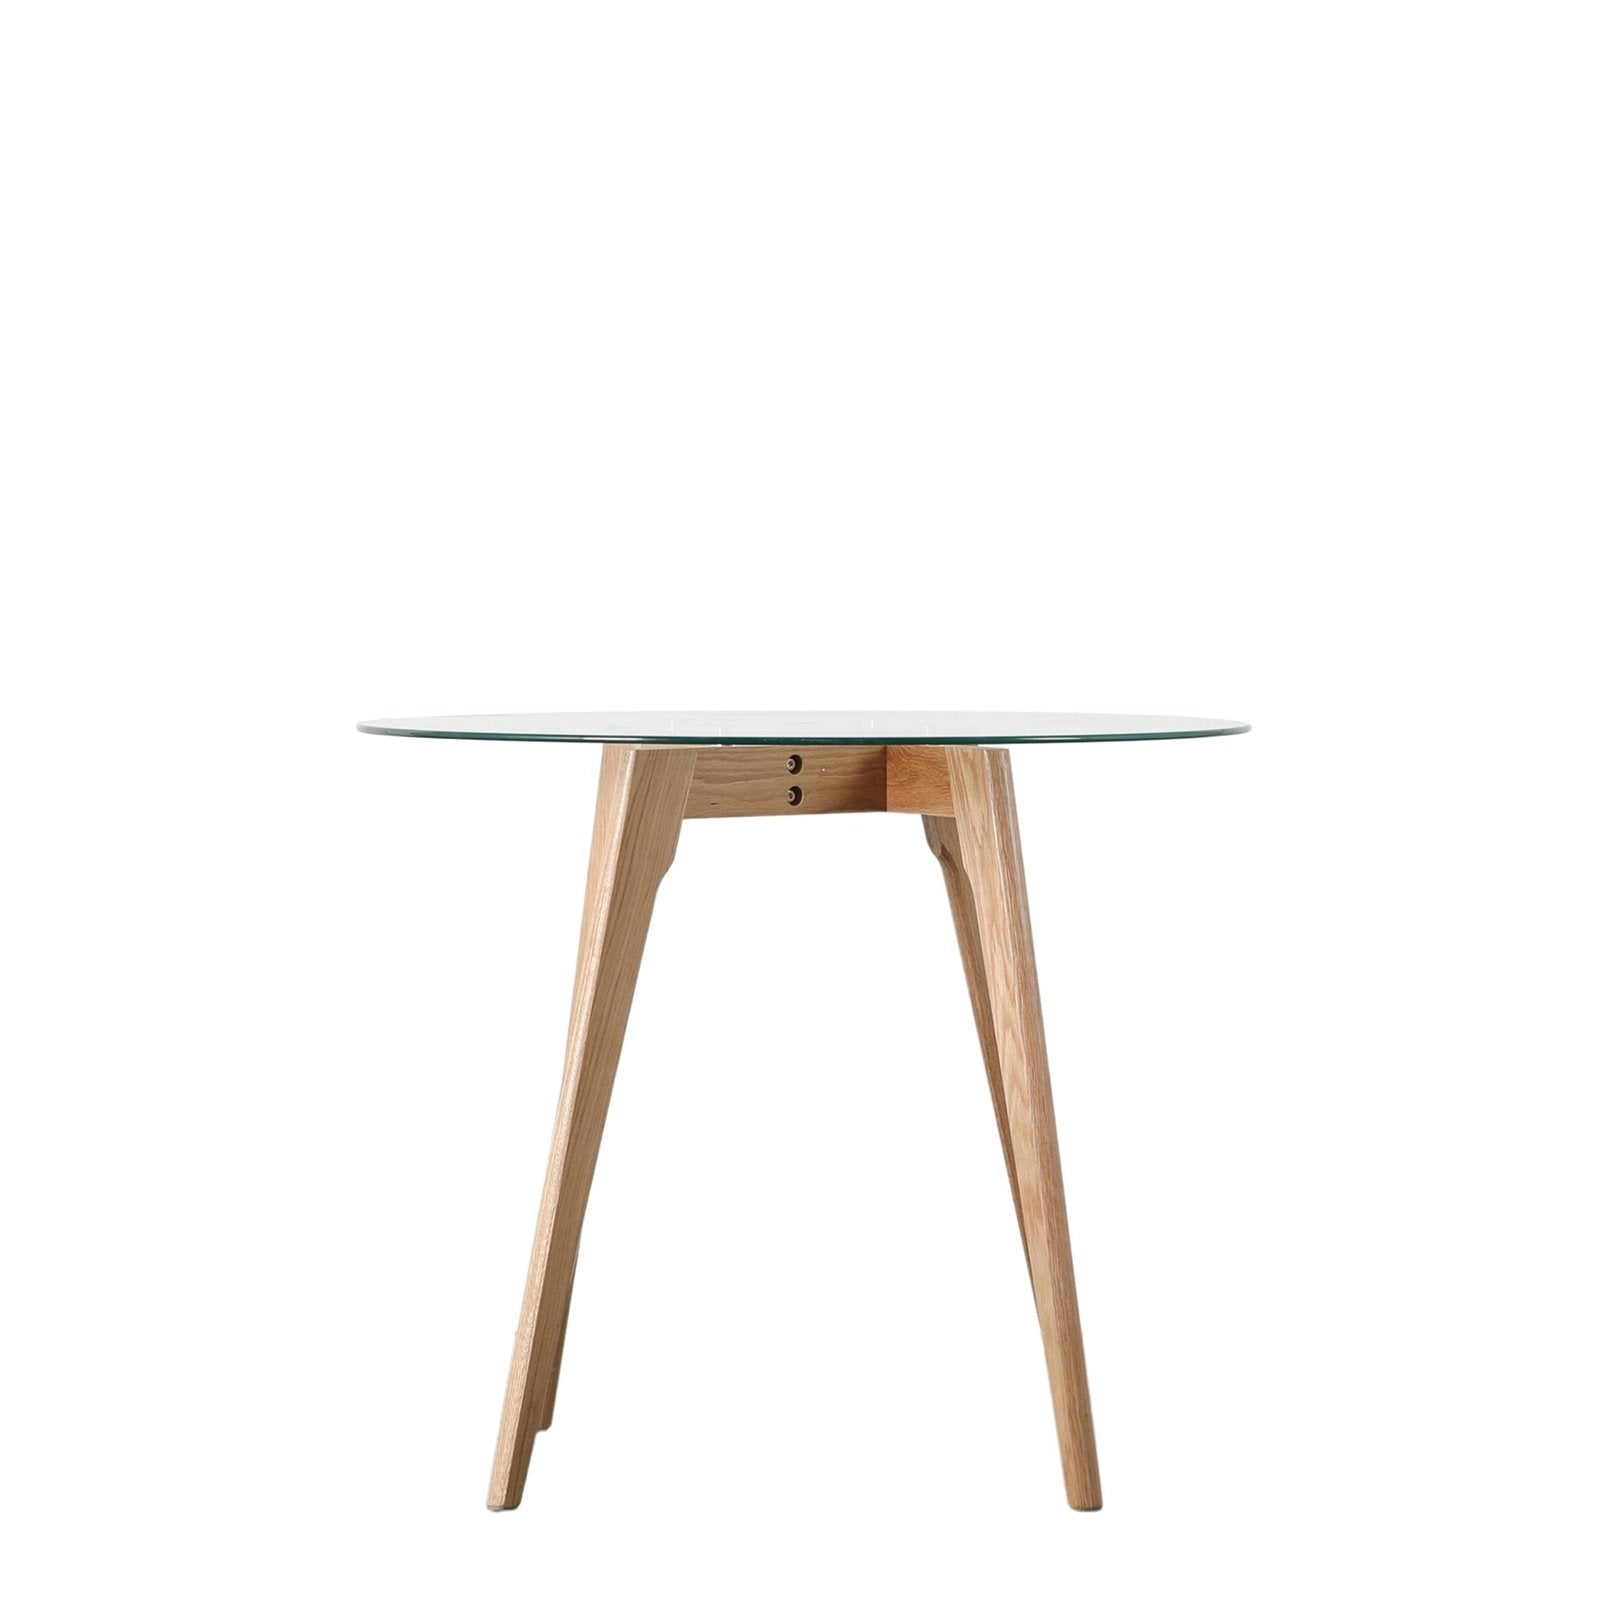 Palma Round Glass Dining Table - Tempered Glass Top - Solid Oak Base - Seats 4